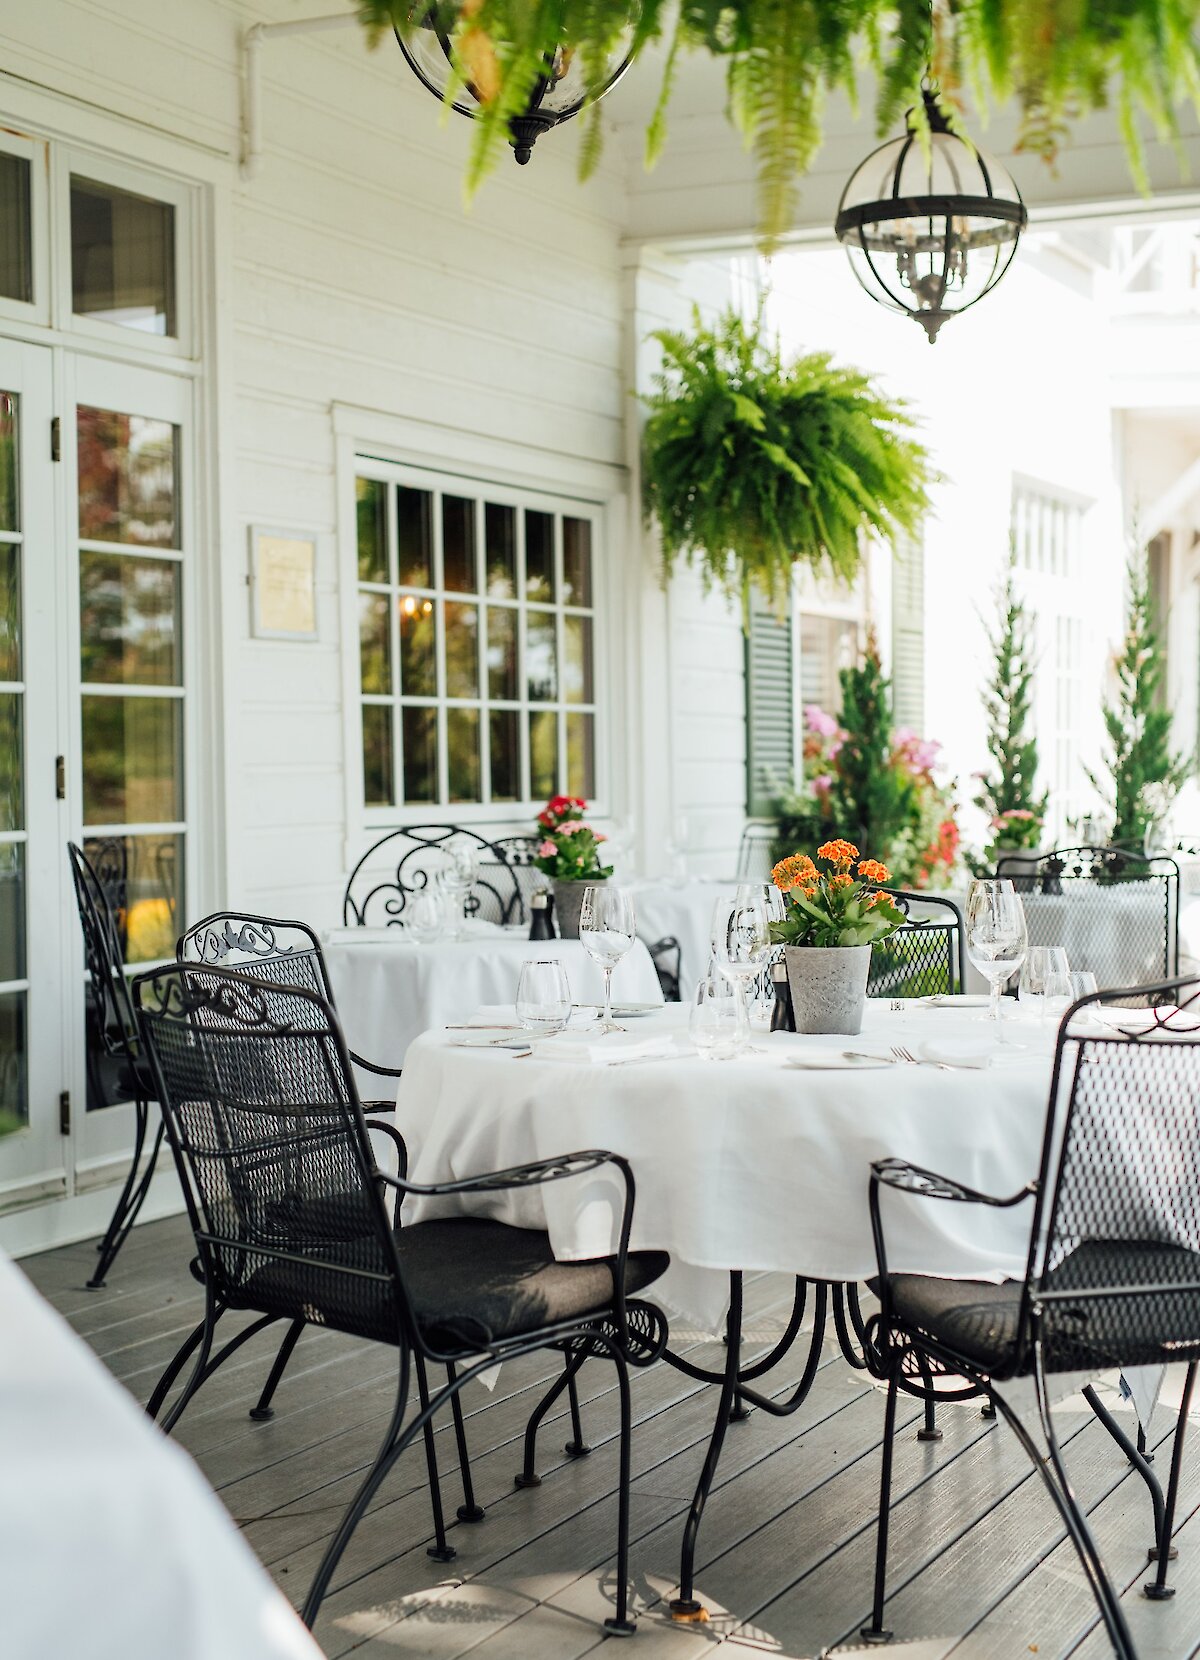 The bistro terrace at Manoir Hovey